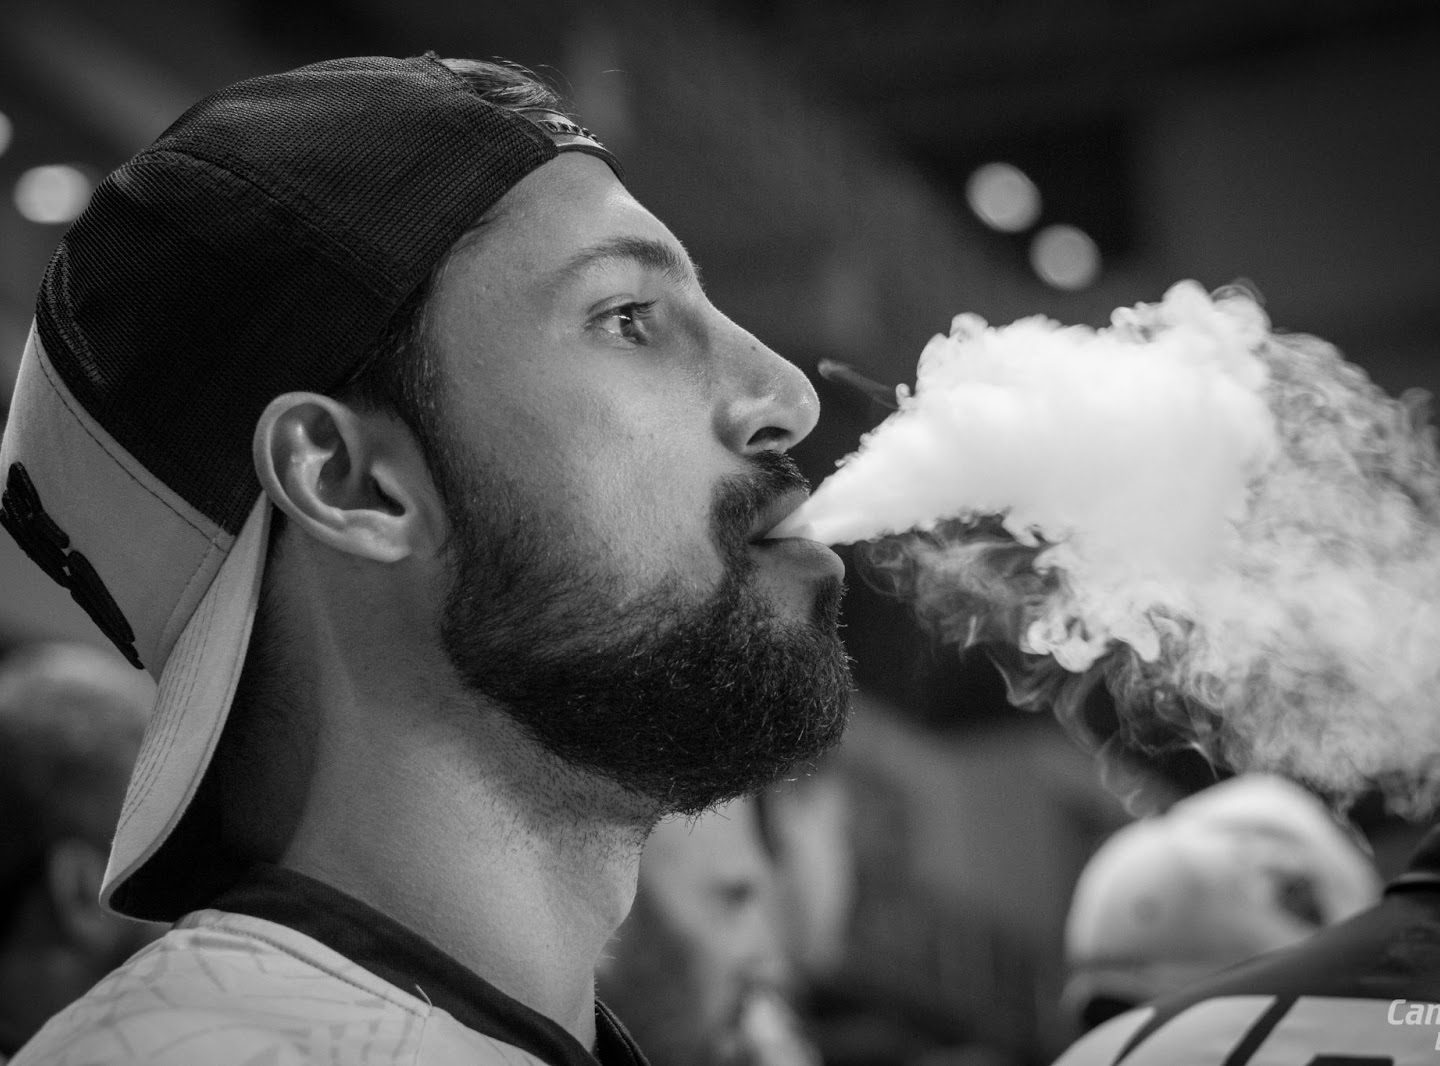 10 Quick Facts About Vaping You Probably Didn’t Know 